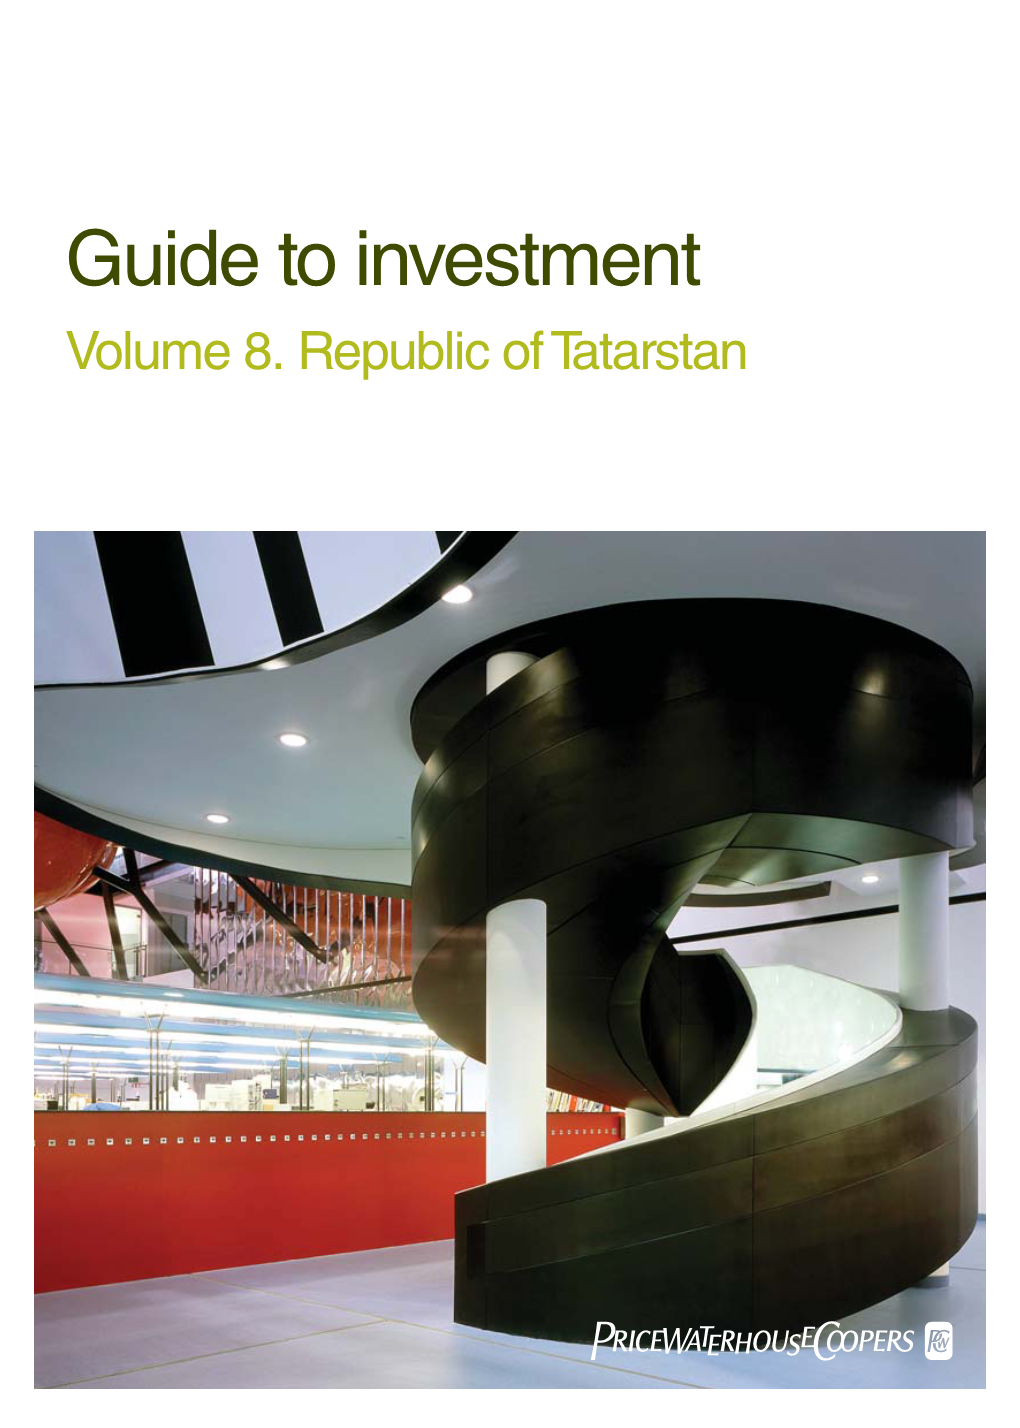 Guide to Investment Volume 8